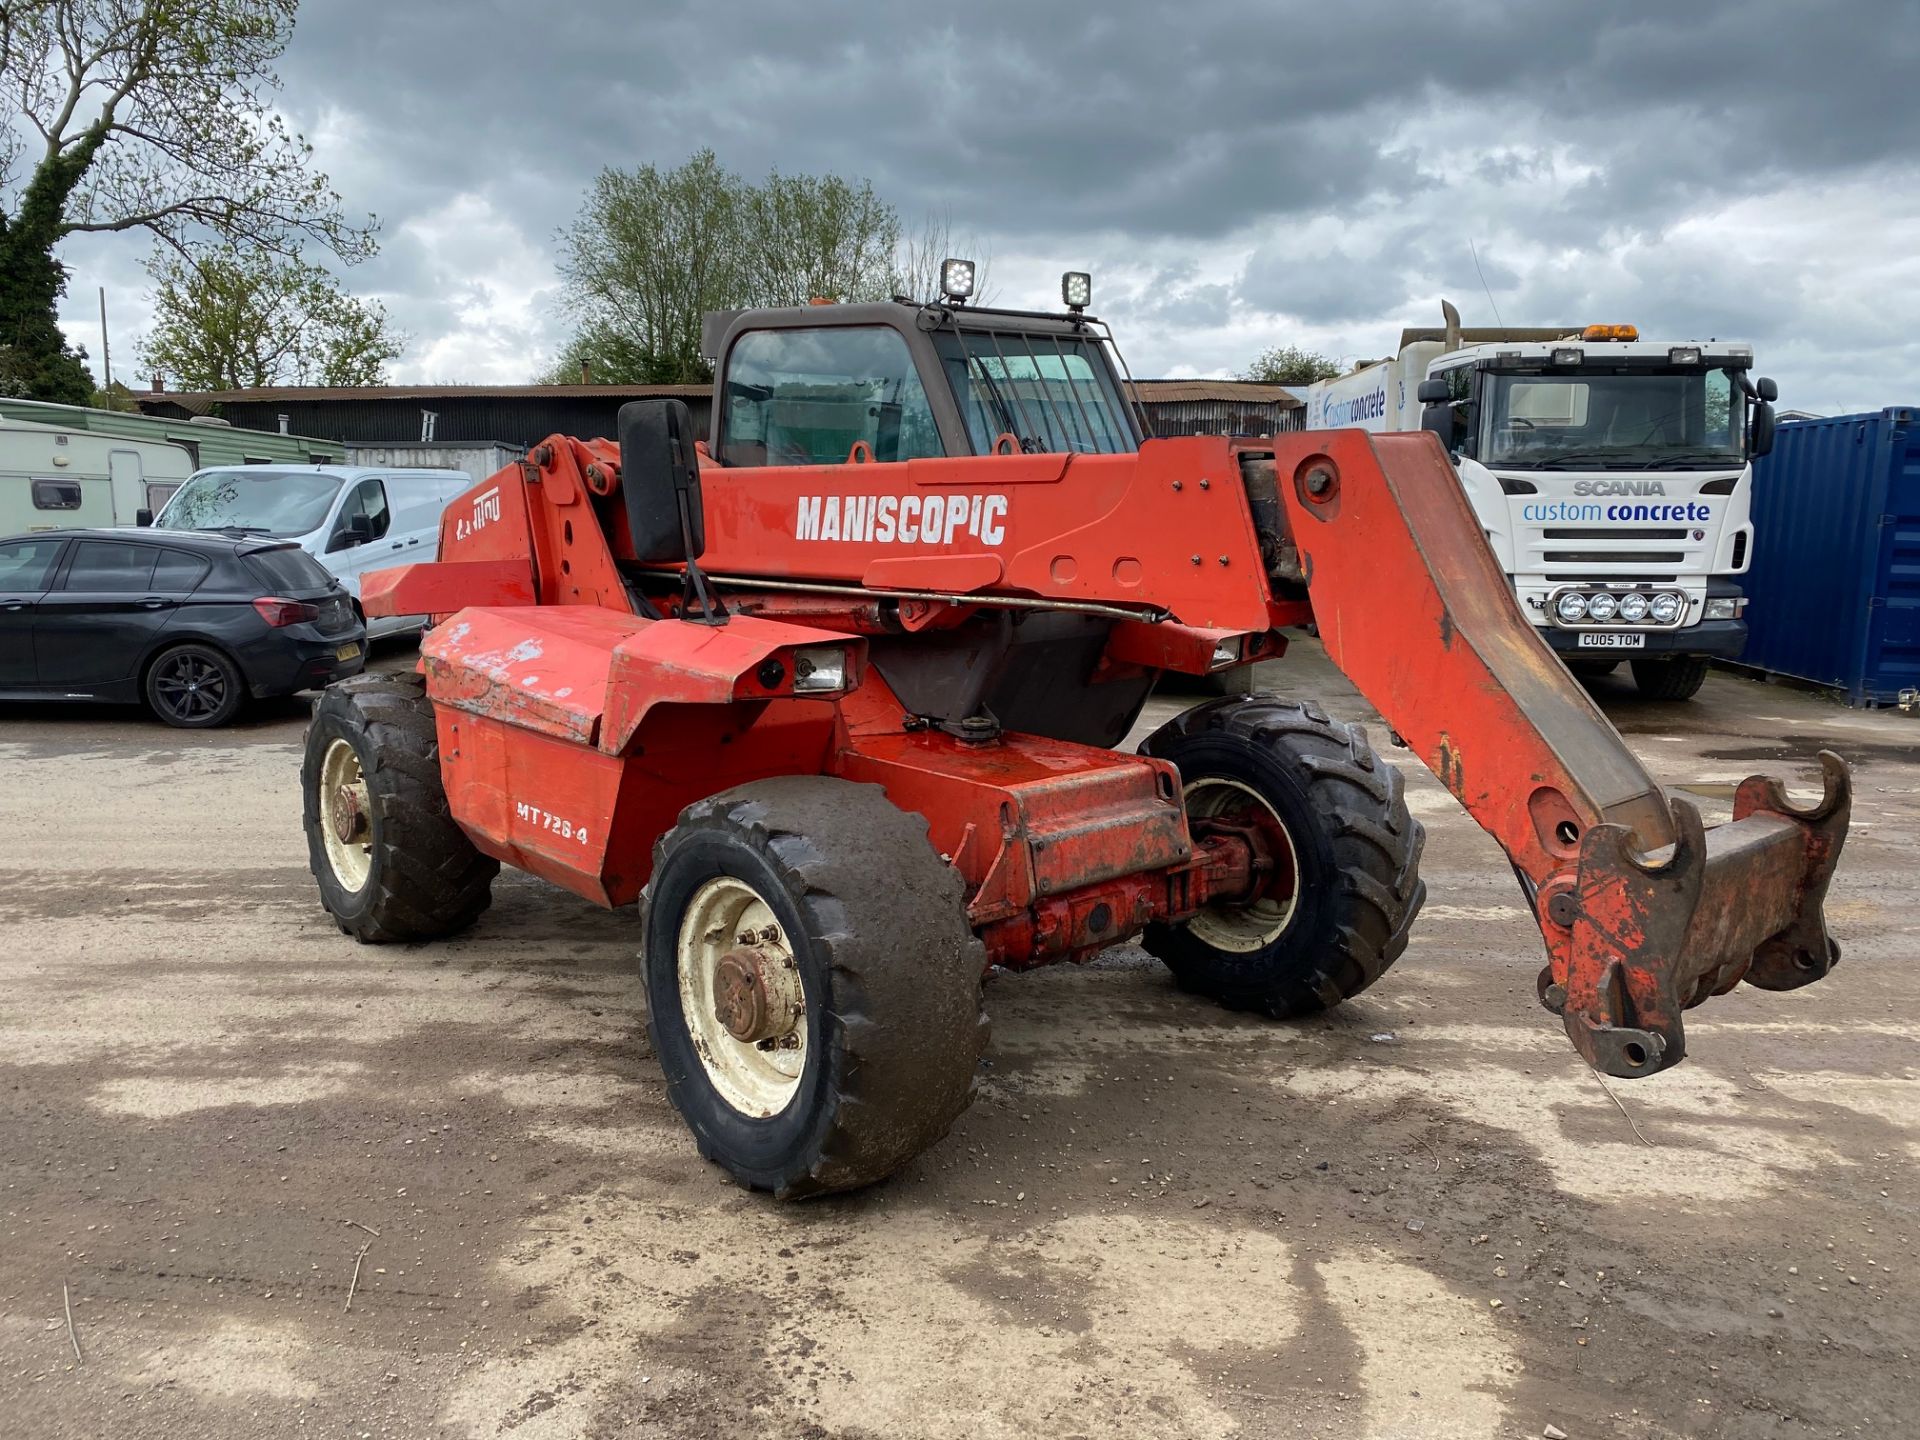 97 MANITOU MT728-4 TELESCOPIC FORKLIFT, 8000 HOURS, GOOD ENGINE AND TRANSMISSION *PLUS VAT* - Image 2 of 4